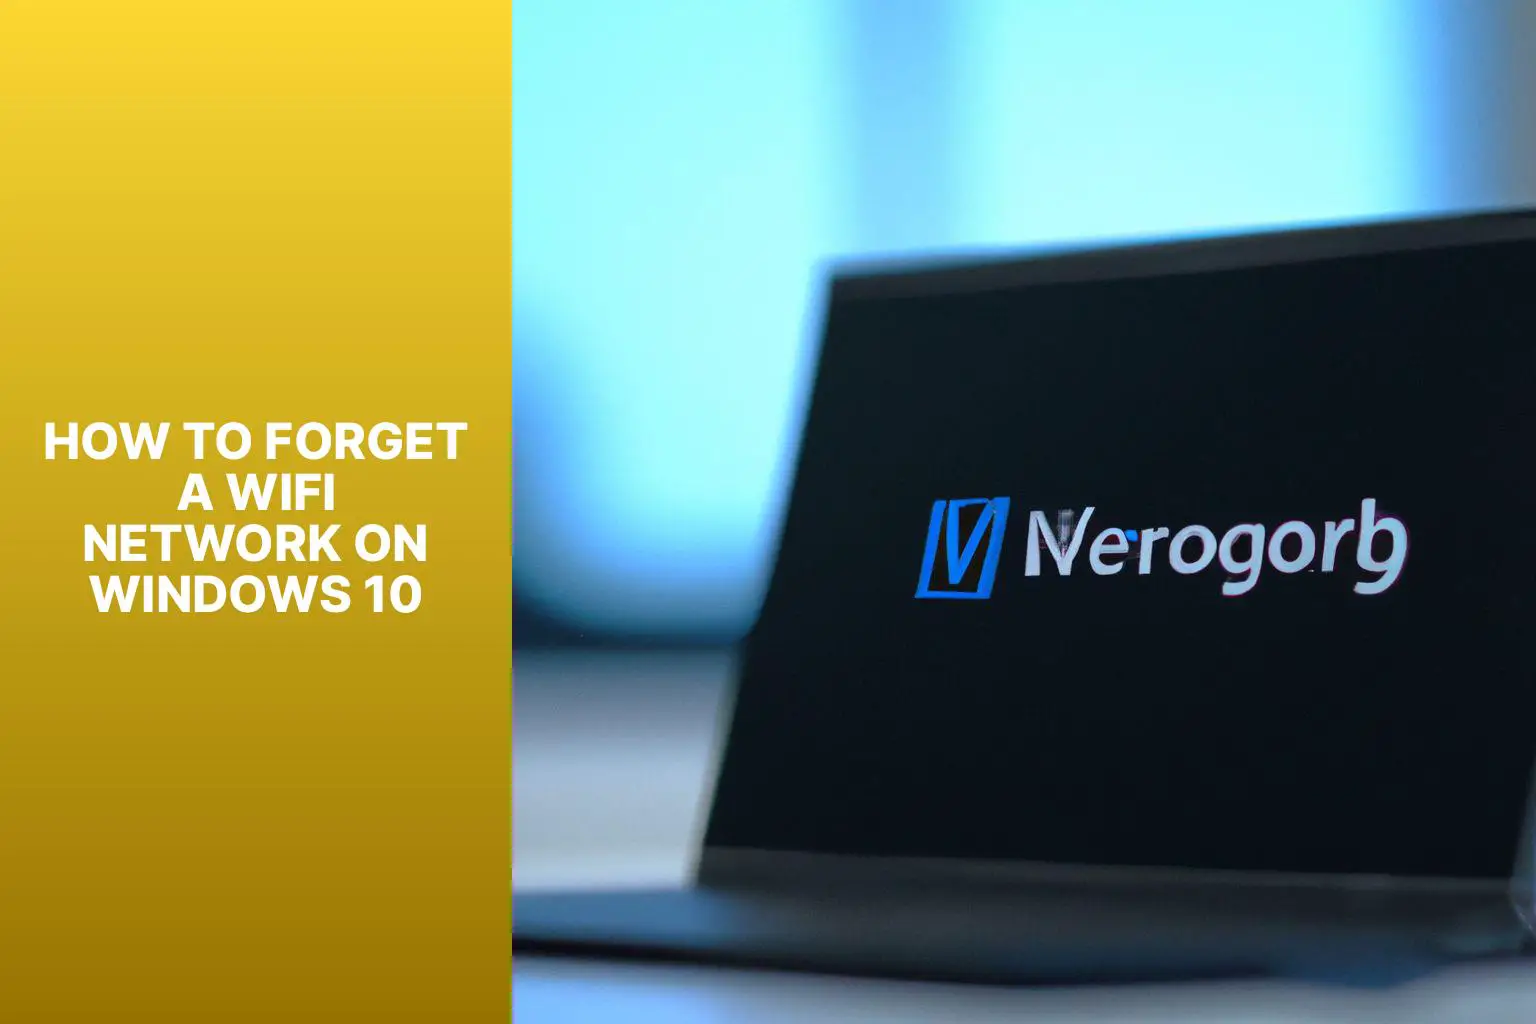 Forget WiFi Networks on Windows 10 how to forget a wifi network on windows 10dkep